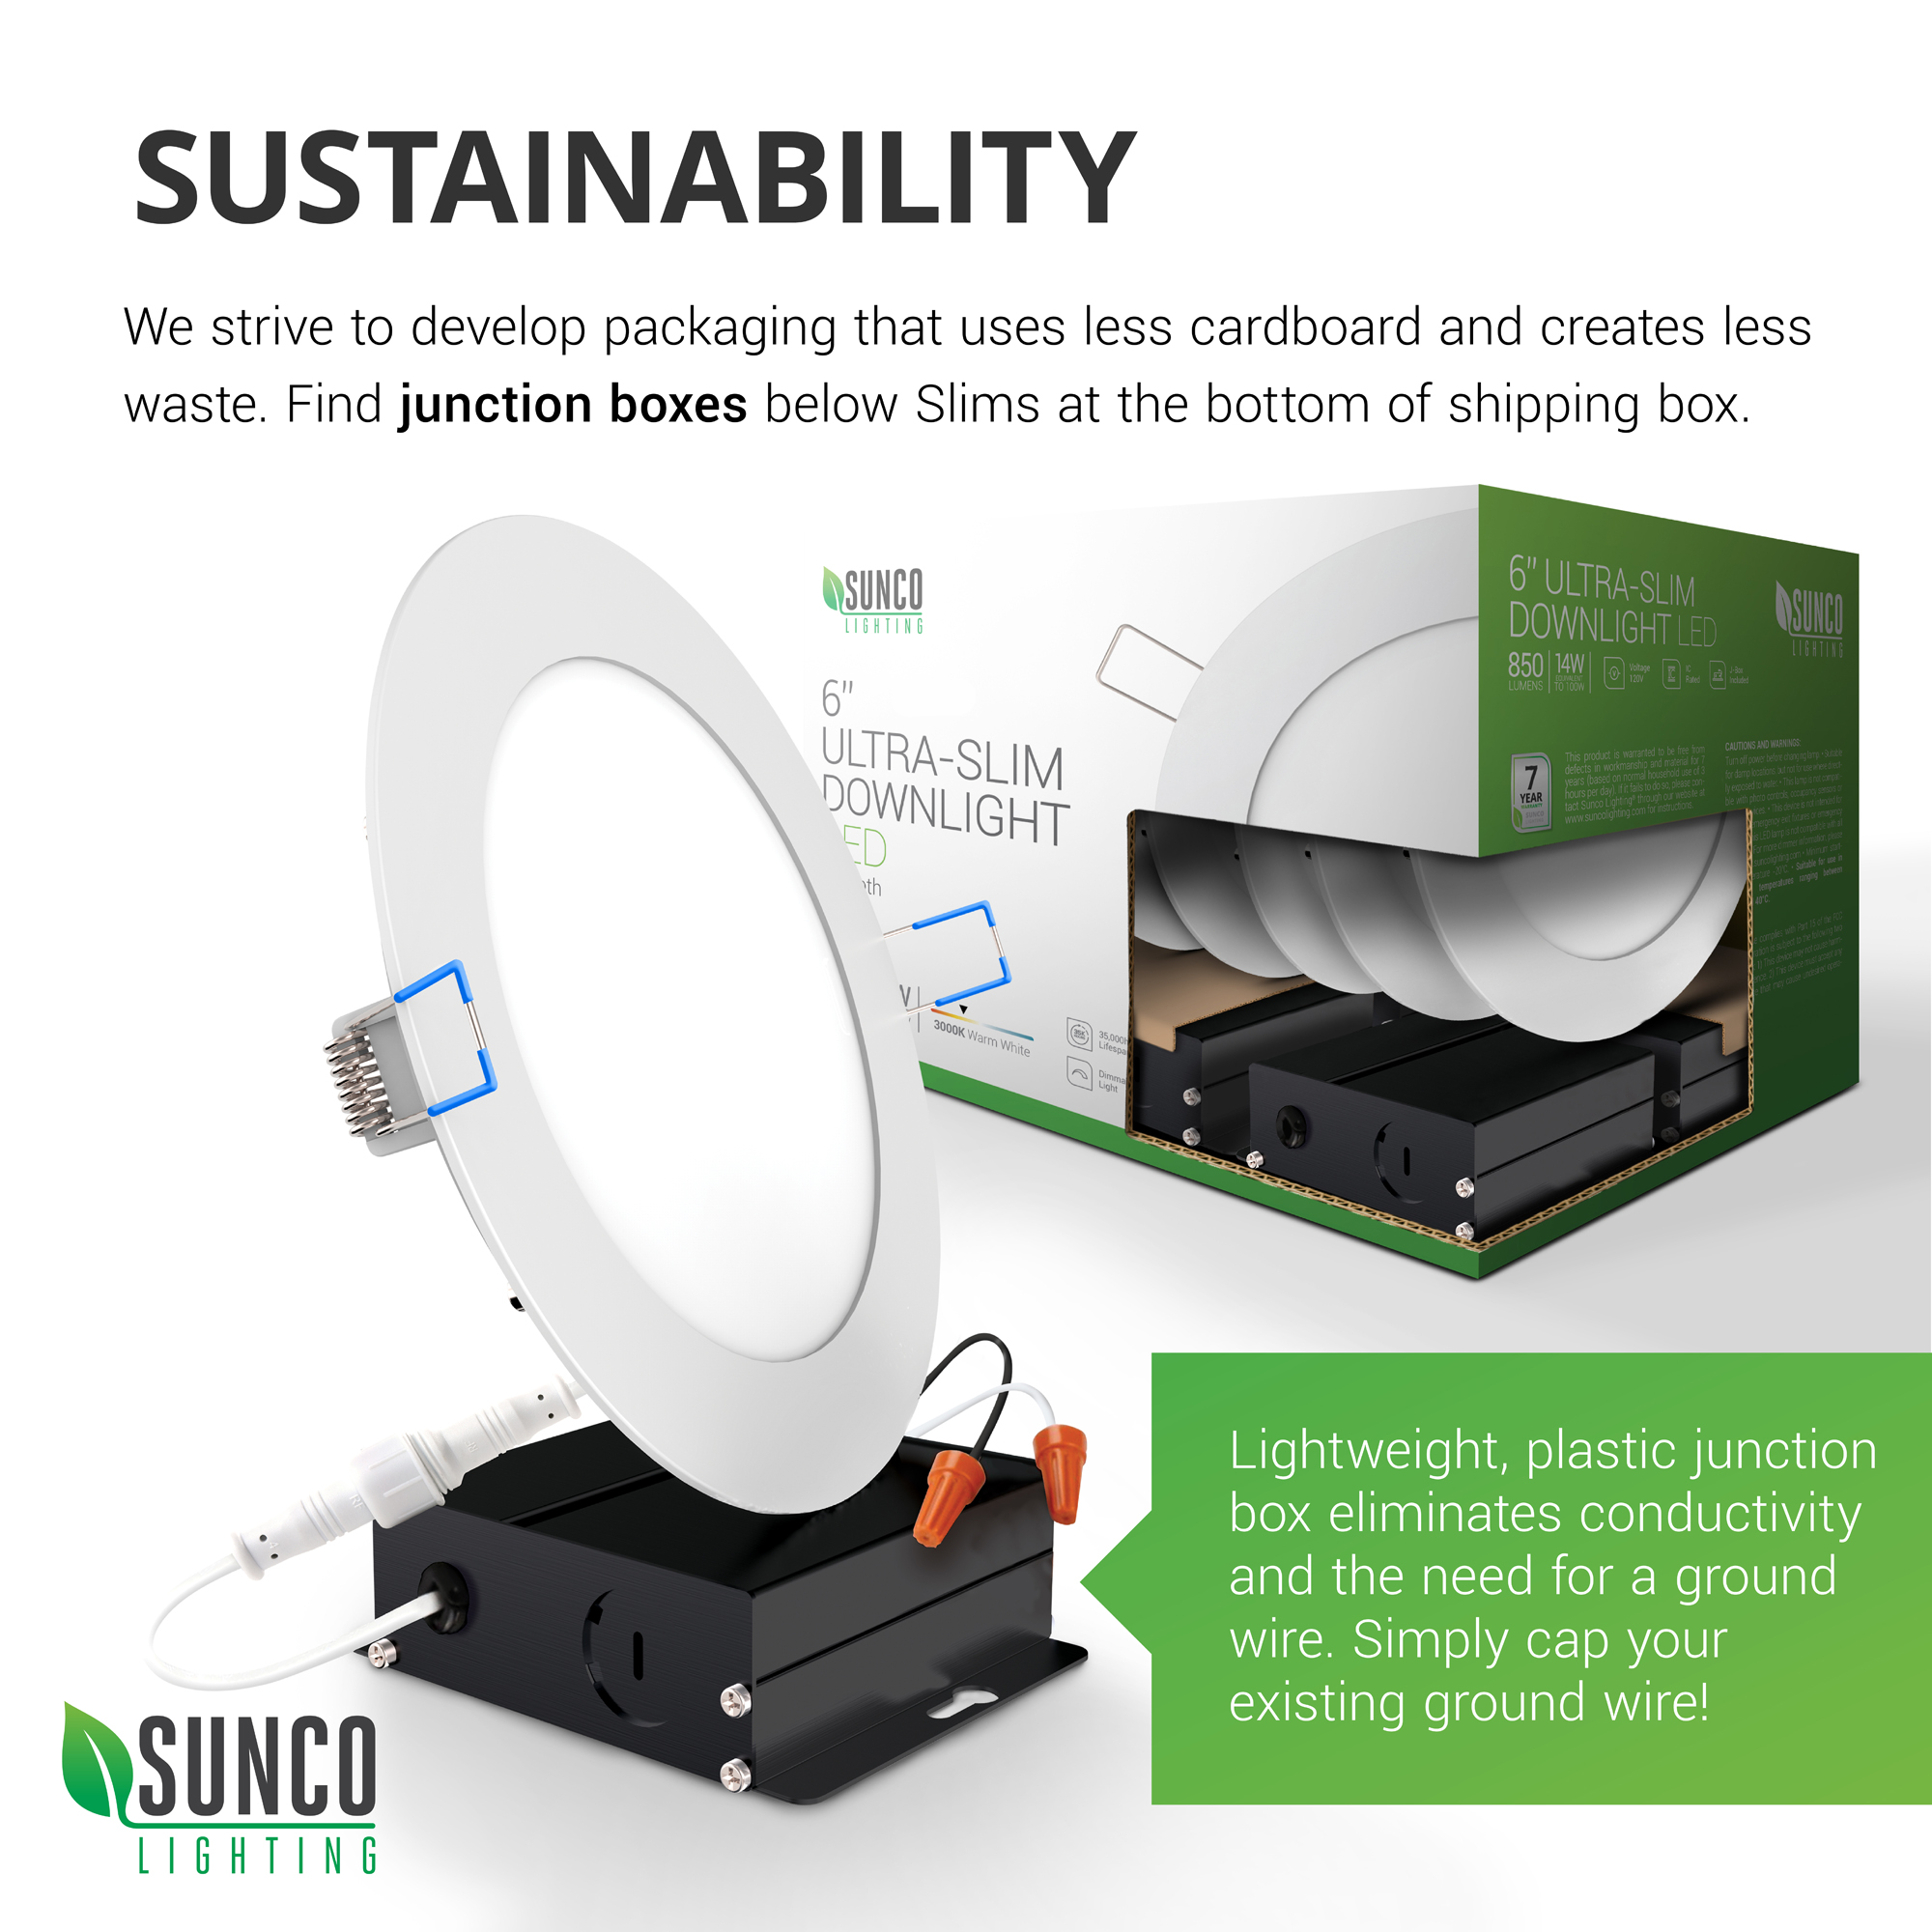 Sunco Lighting Pack Inch Slim LED Downlight with Junction Box, 14W=100W,  850 LM, Dimmable, 2700K Soft White, Recessed Jbox Fixture, IC Rated, Simple  Retrofit Installation ETL  Energy Star